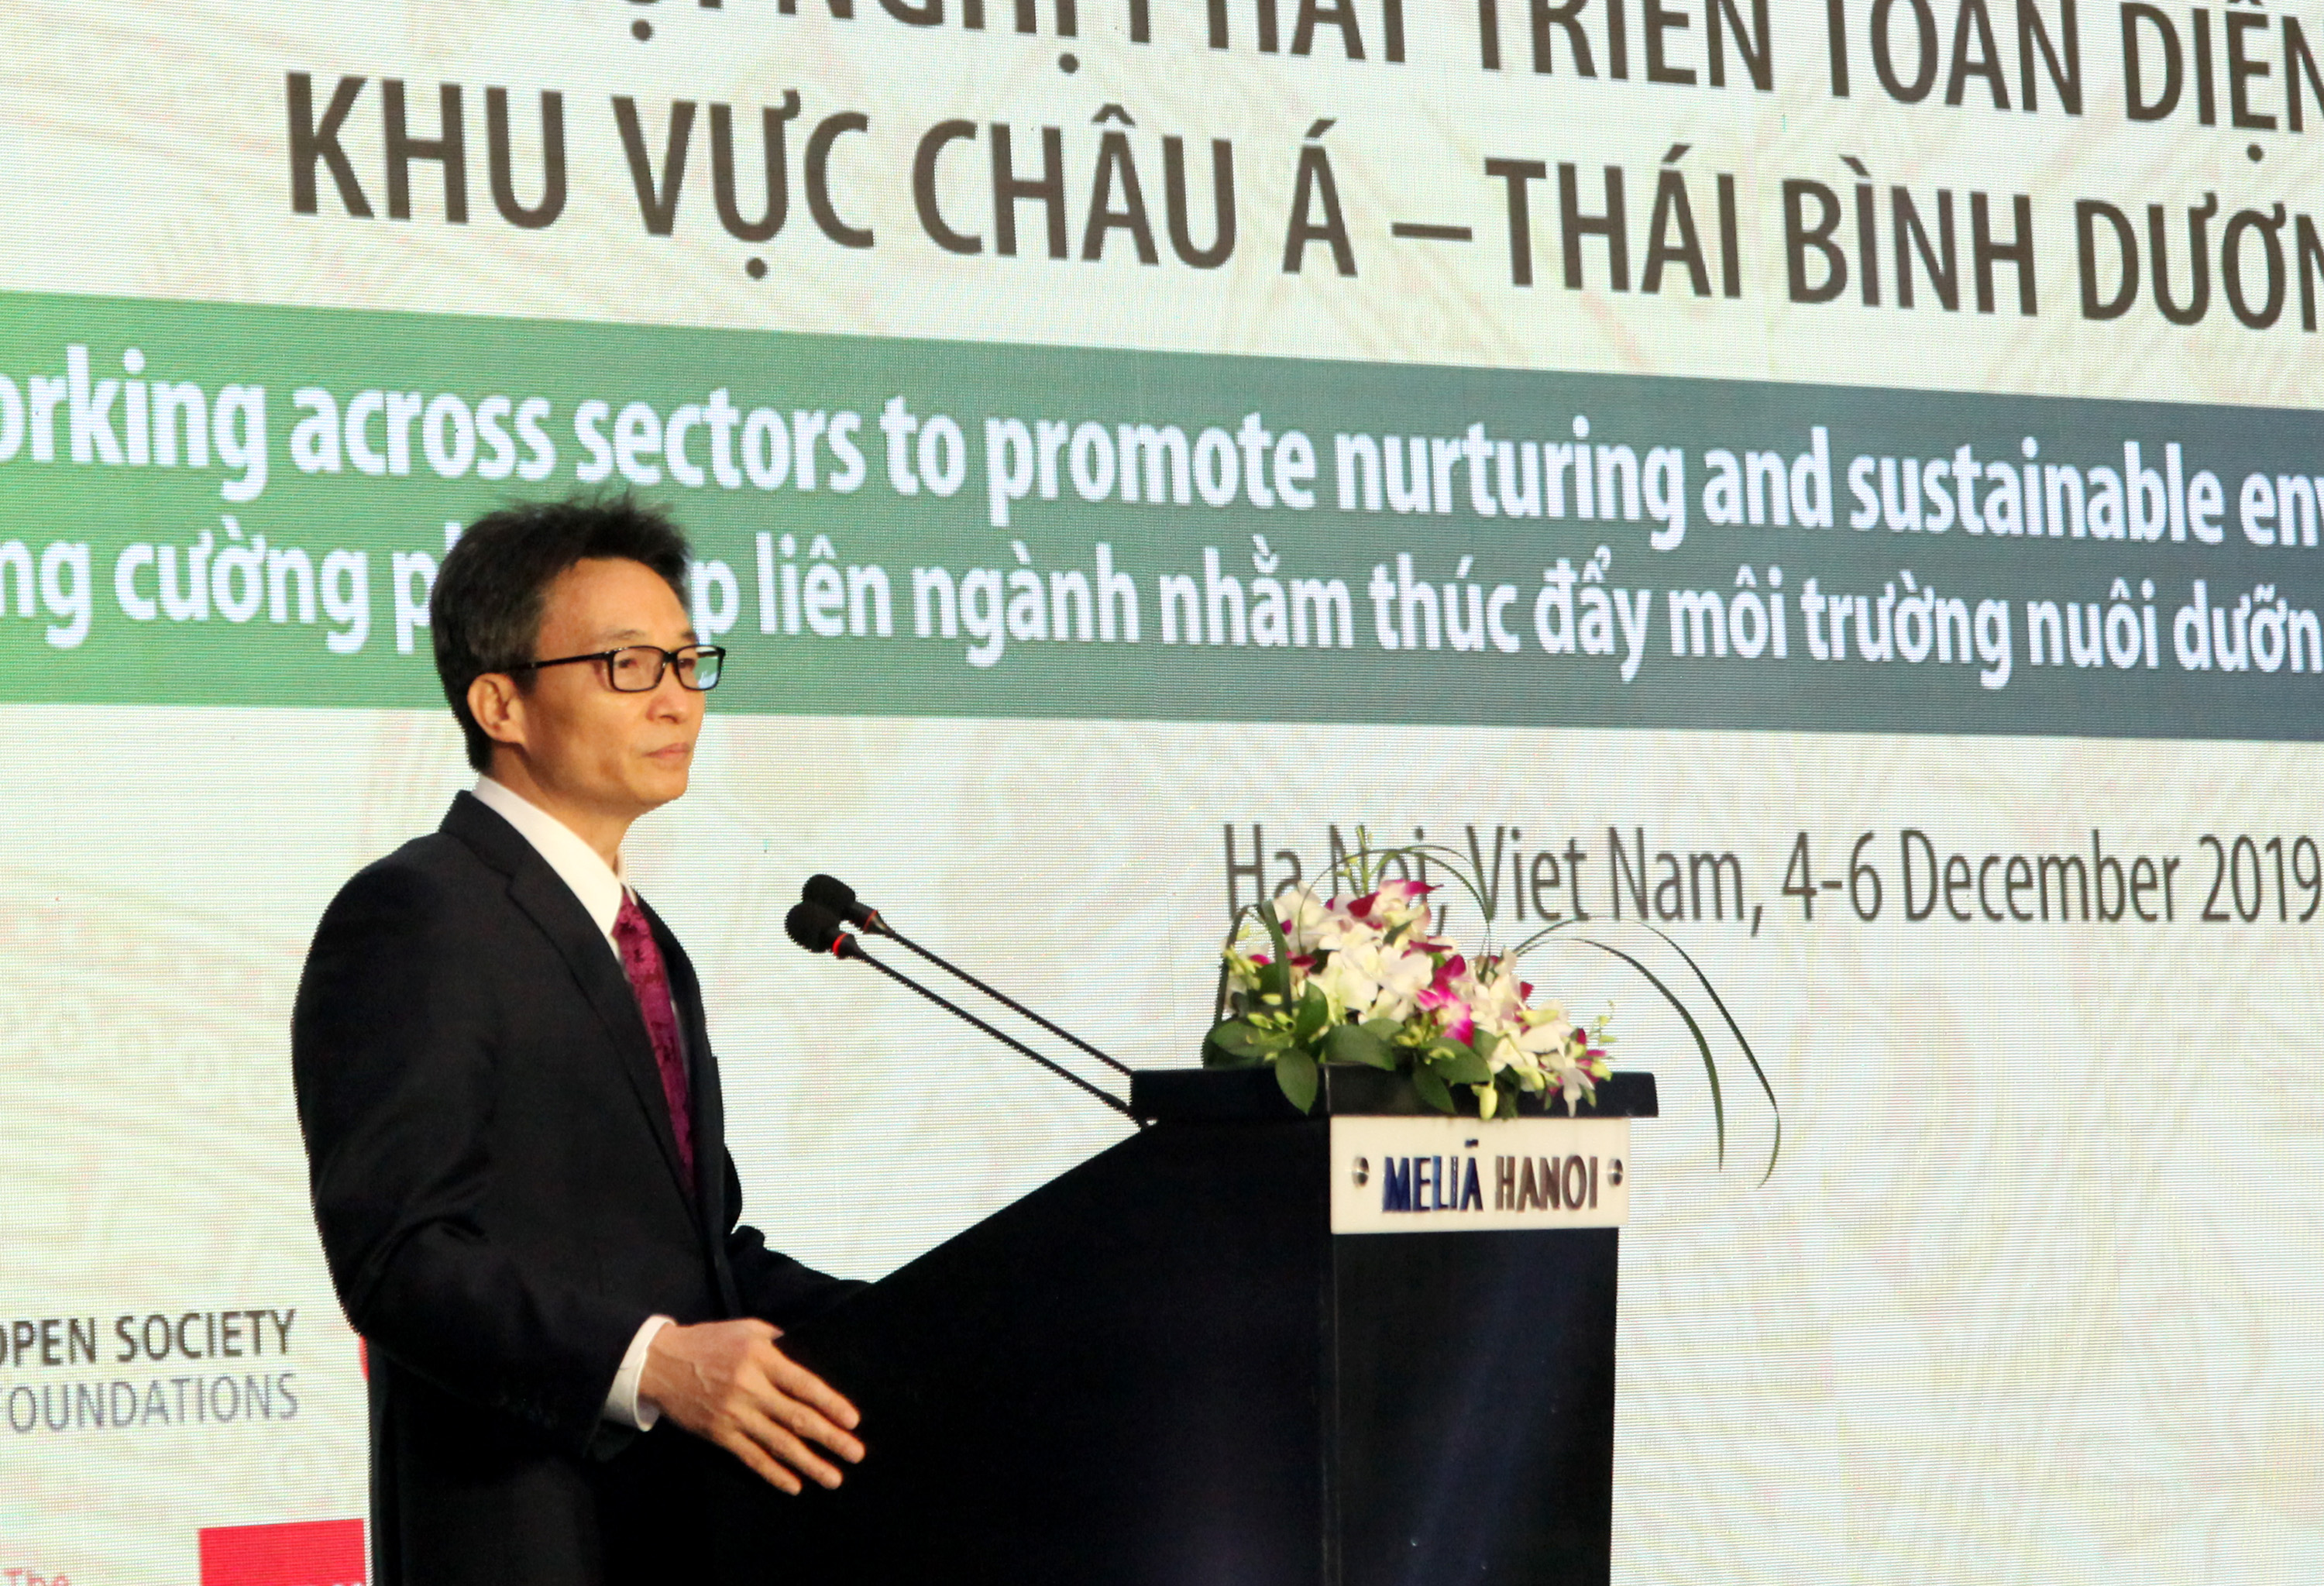 Hanoi conference bolsters sustainable environments, nurturing care for young children